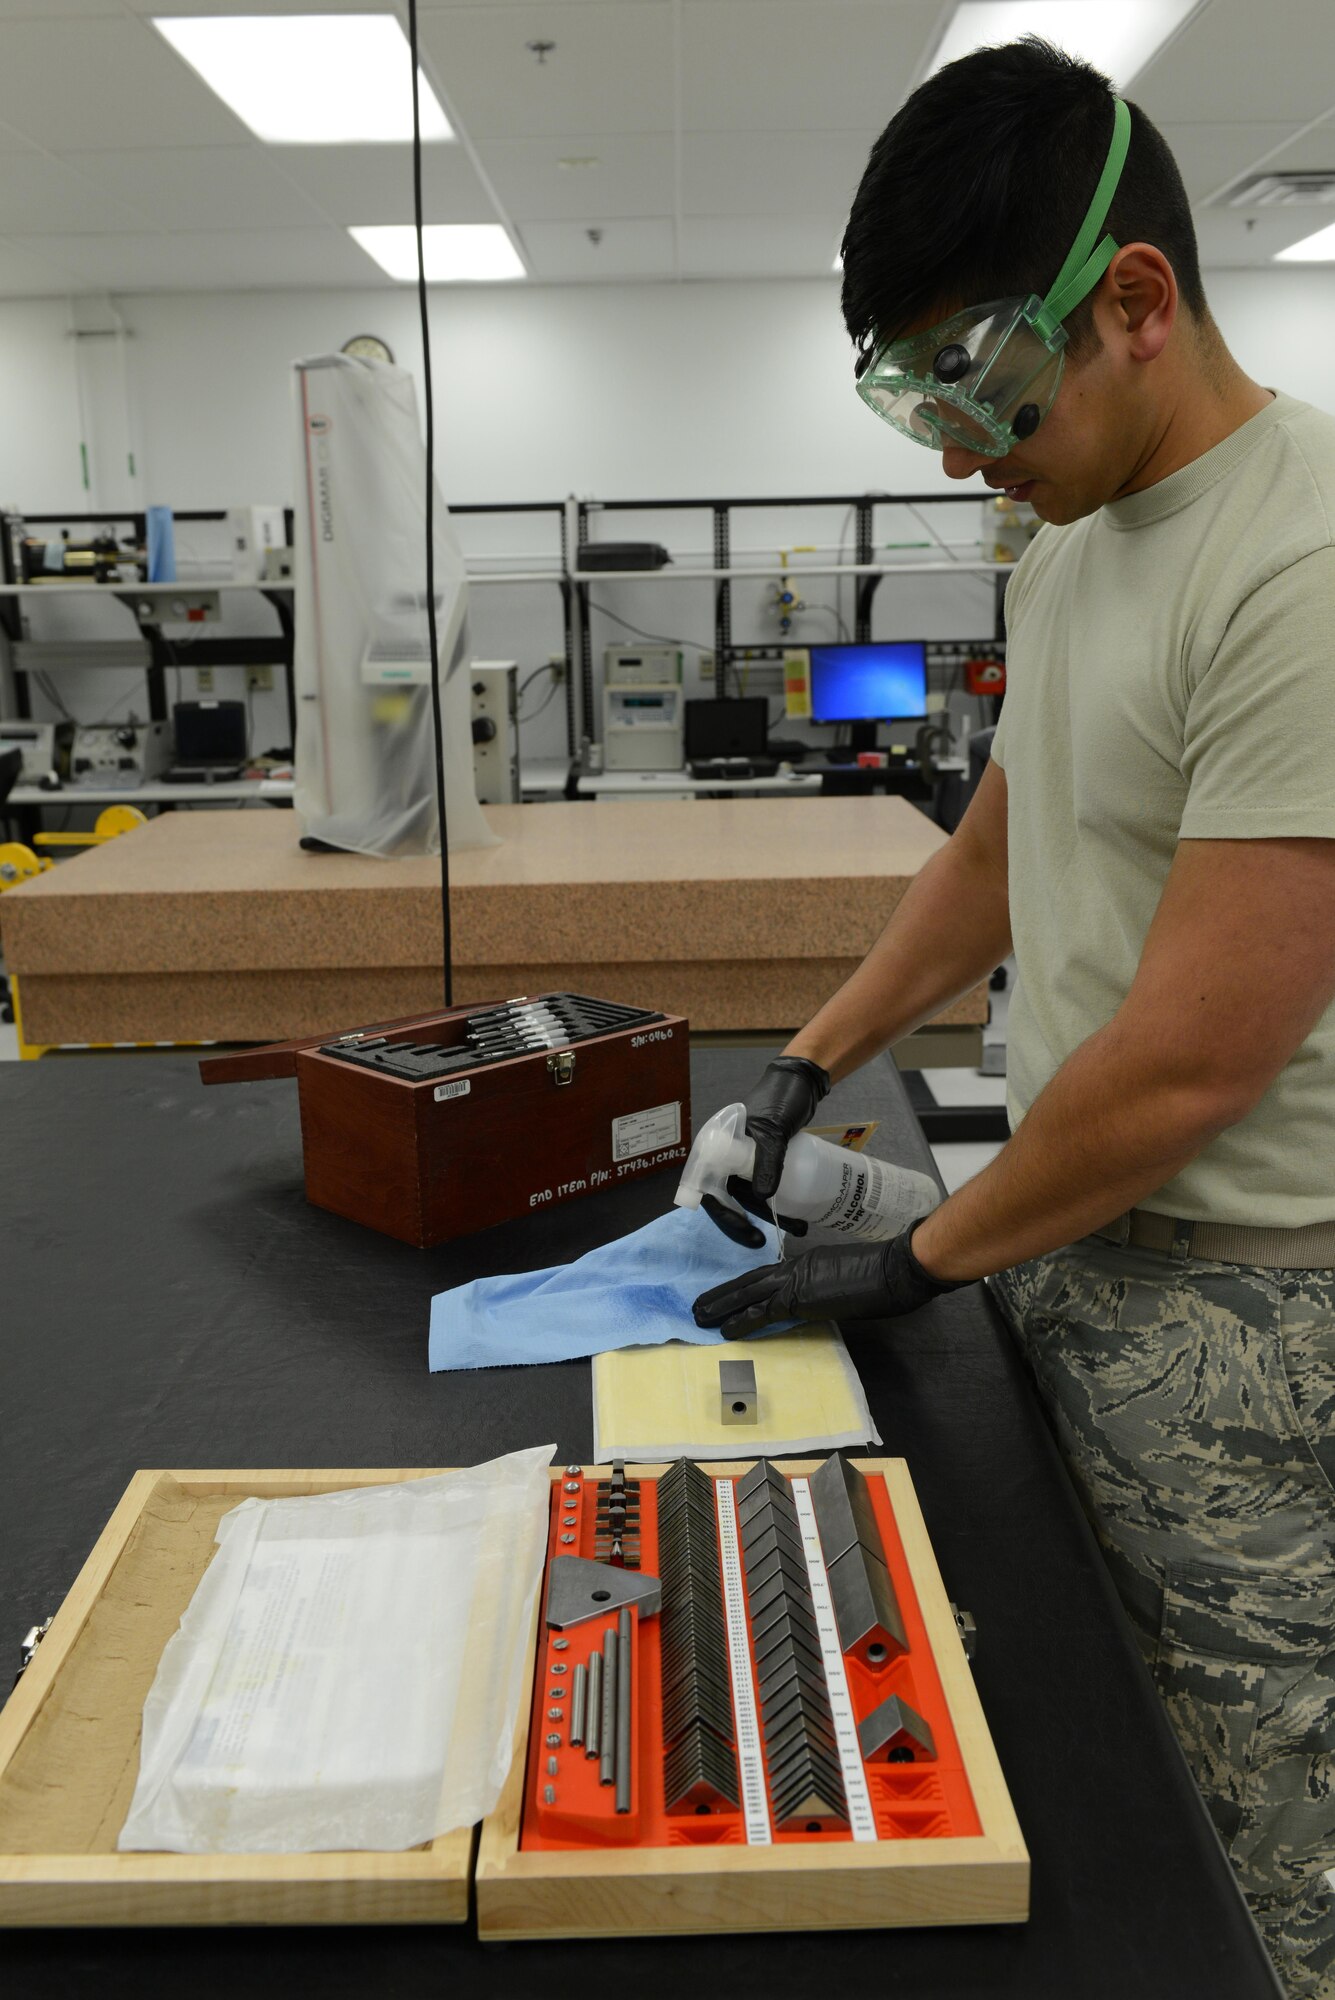 Senior Airman Donald Area, 56th Component Maintenance Squadron precision measurement equipment laboratory technician, cleans gauge blocks with ethyl alcohol Jan. 24, 2017, at Luke Air Force Base, Ariz. The gauge blocks are used to calibrate micrometers for fabrication flight spacing or depth measurements on an aircraft. (U.S. Air Force photo by Airman 1st Class Pedro Mota)